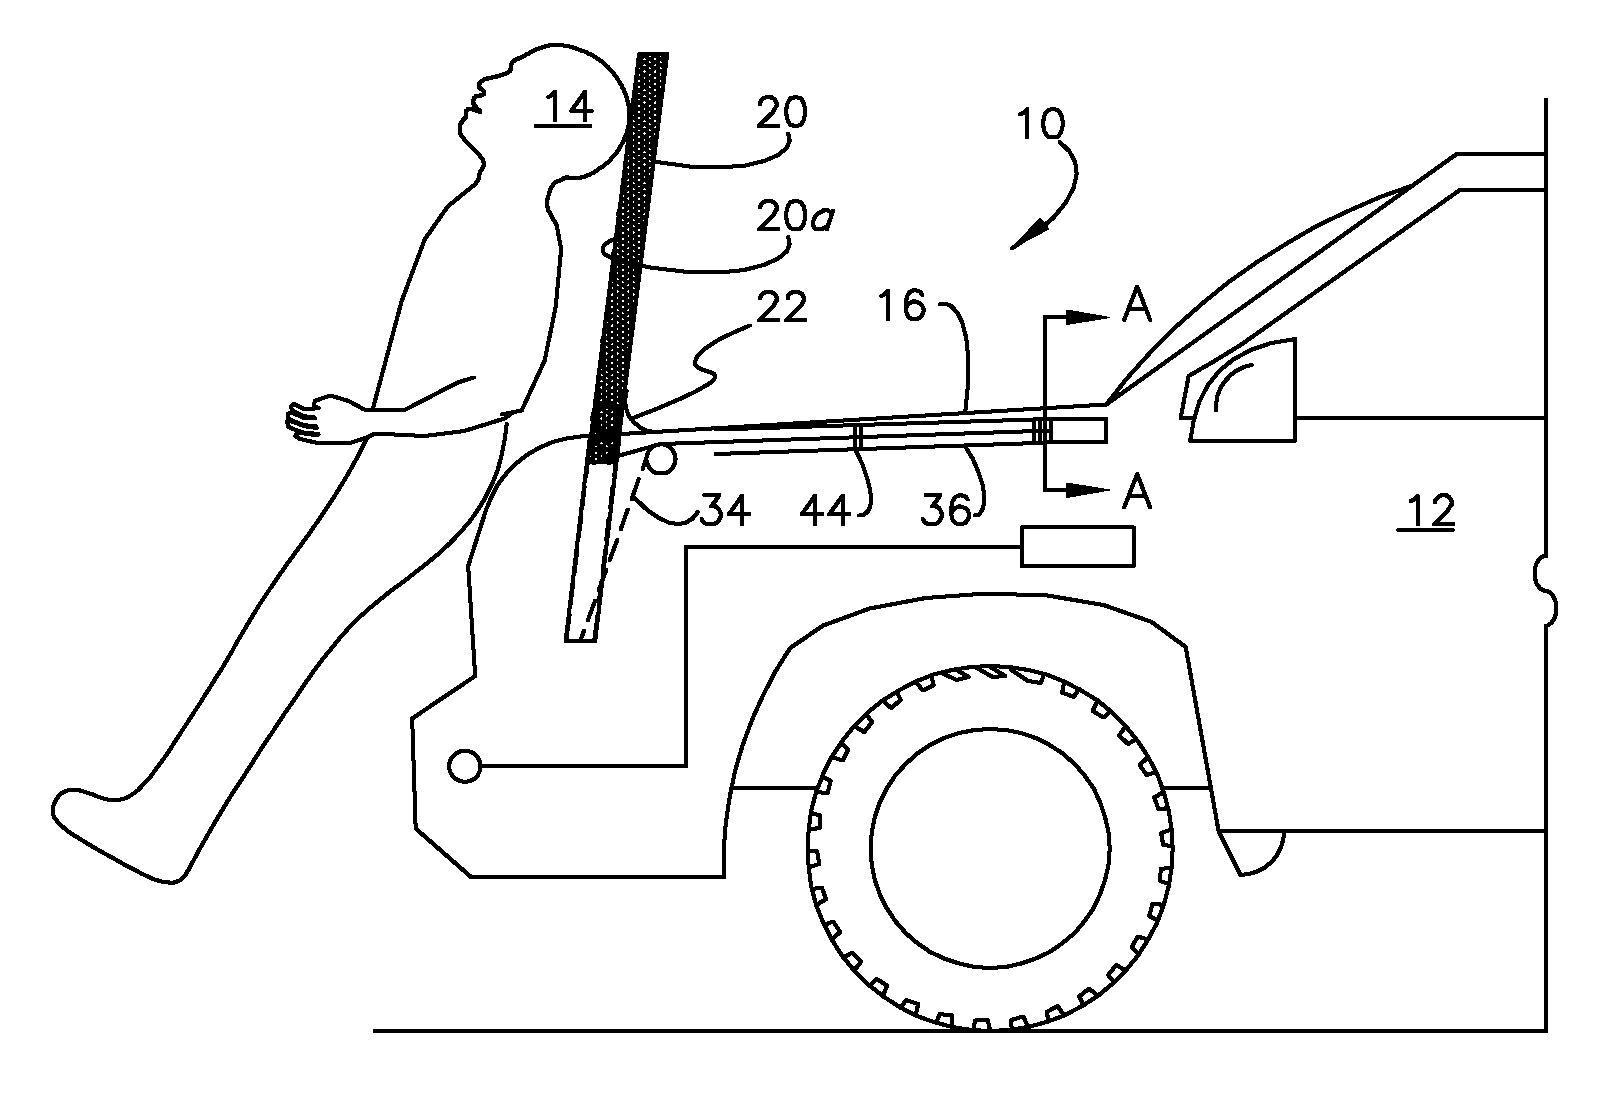 Pedestrian impact mitigation system and method of use